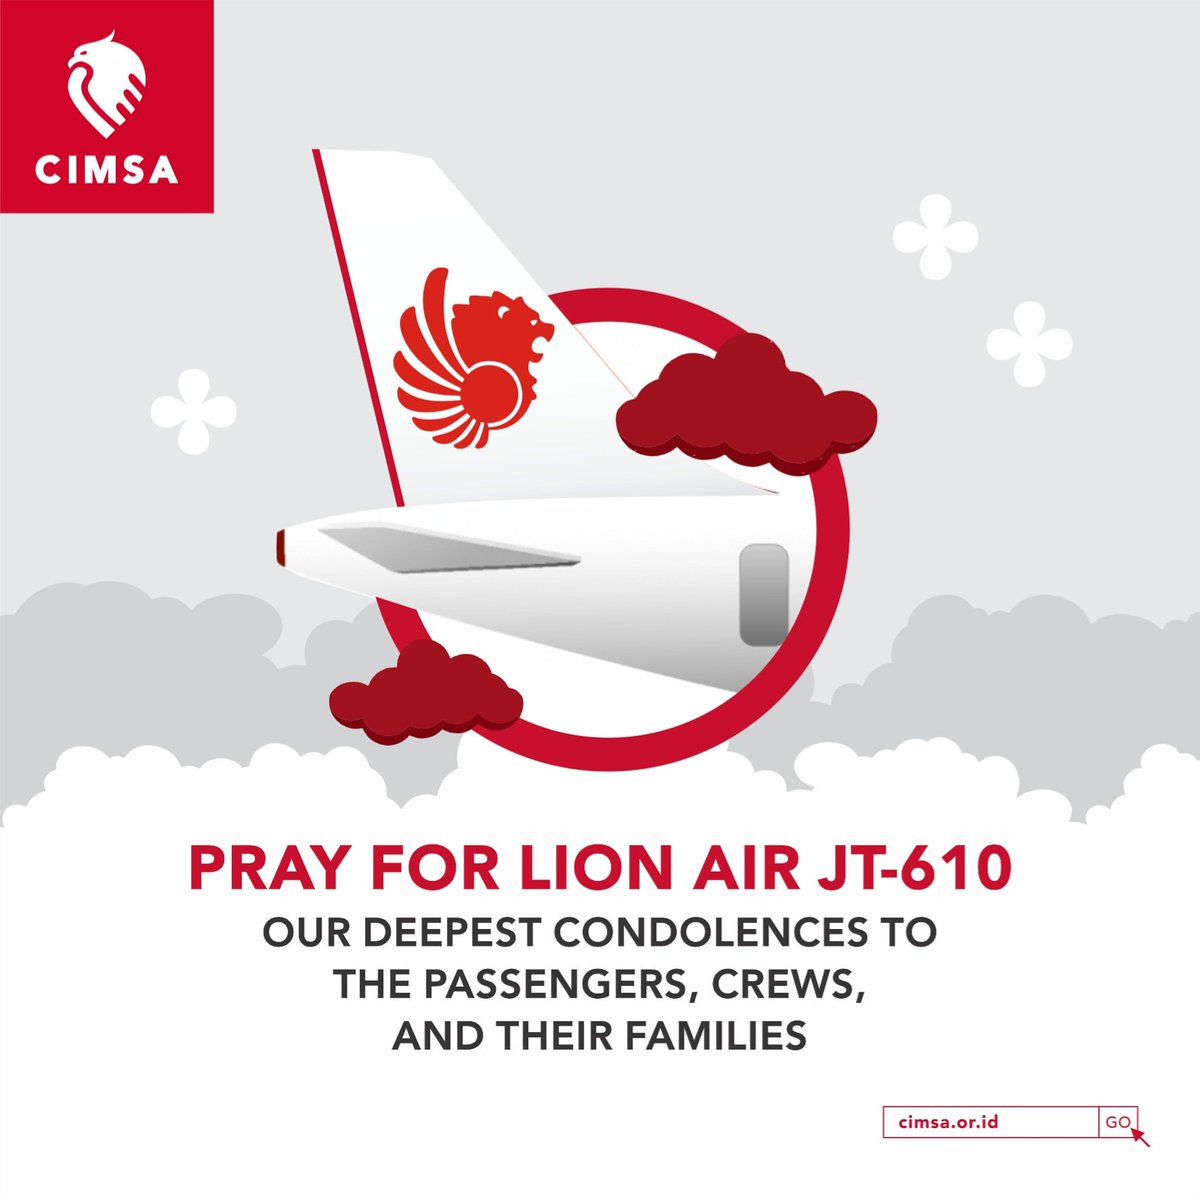 CIMSA Indonesia on Twitter: "CIMSA would like to send our deepest  condolences to the passengers, crews, and their families. We are deeply  saddened with the tragedy of the Lion Air JT-610 plane